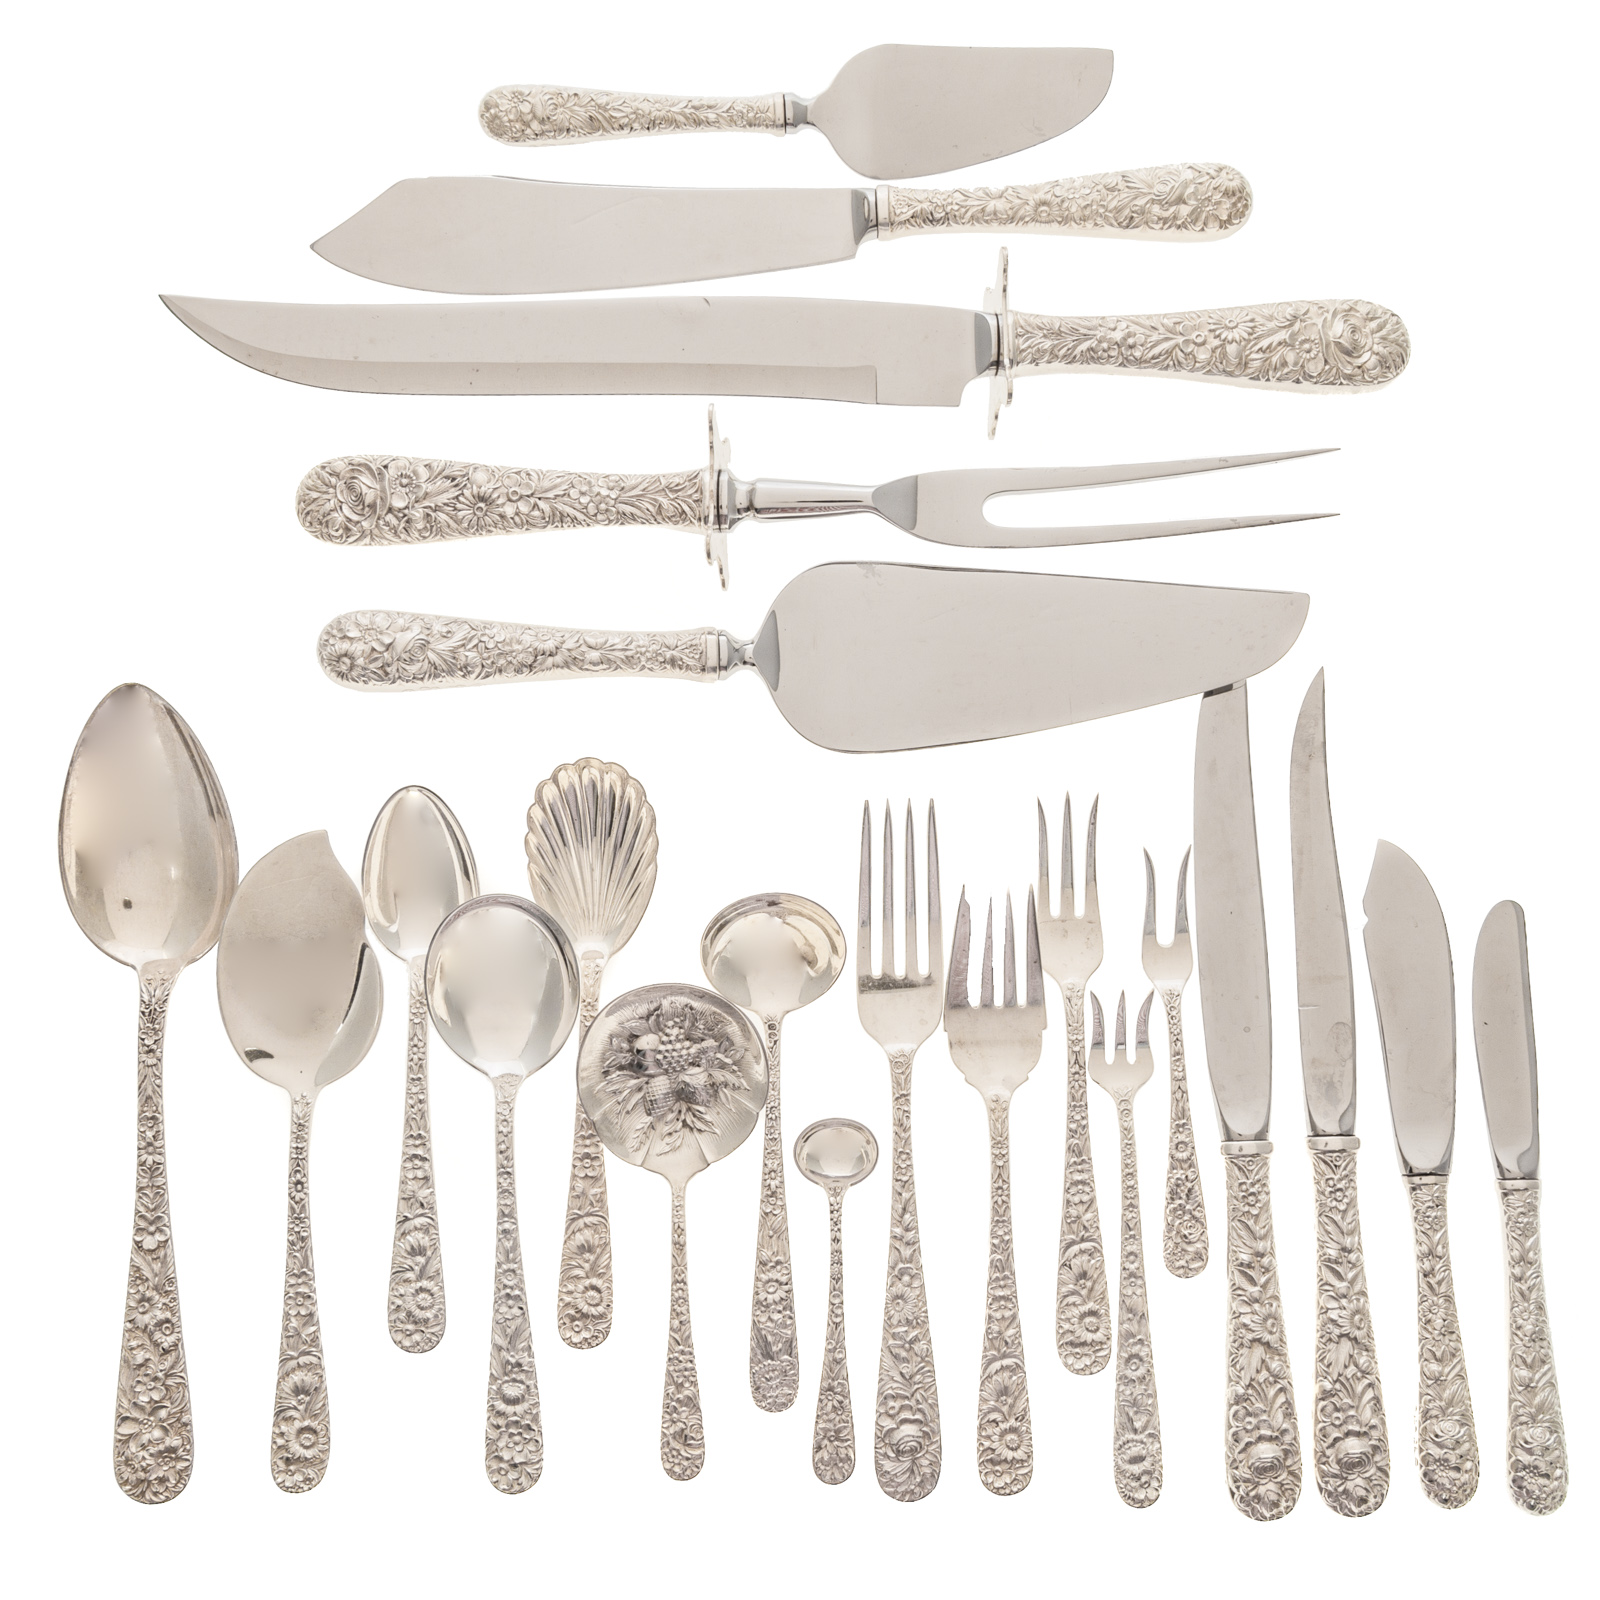 S KIRK & SON STERLING REPOUSSE FLATWARE